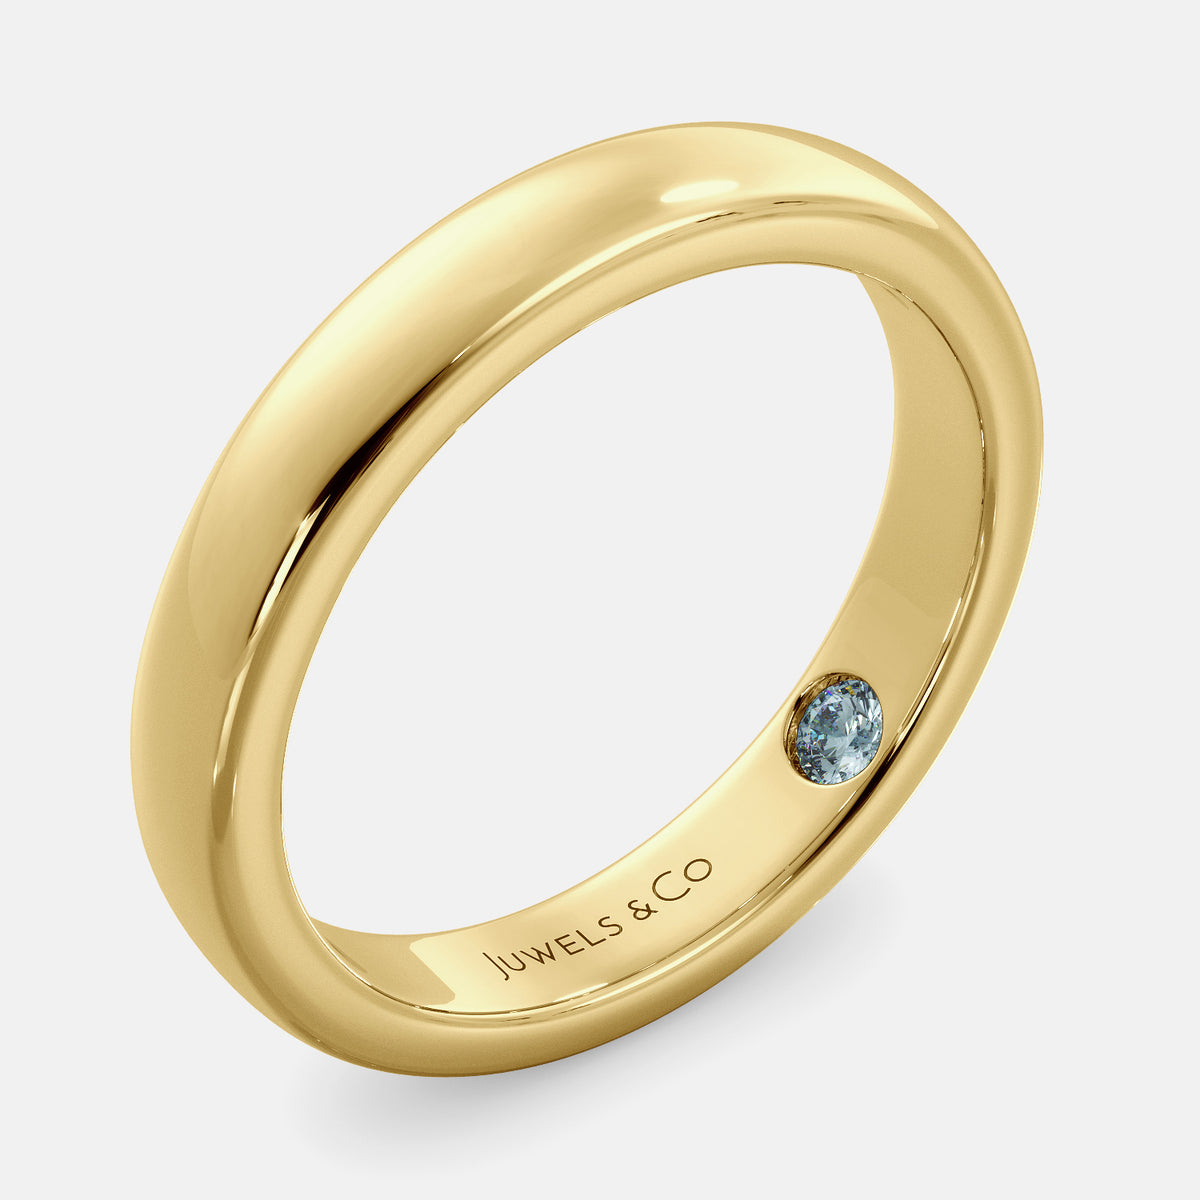 A close-up of a yellow gold flat wedding band with a hidden stone. The band is a classic and timeless design that is perfect for any occasion. The hidden stone can be customized with one of 12 different gemstones, including diamonds, rubies, sapphires, and emeralds. This makes the band a unique and personal choice for the wearer.